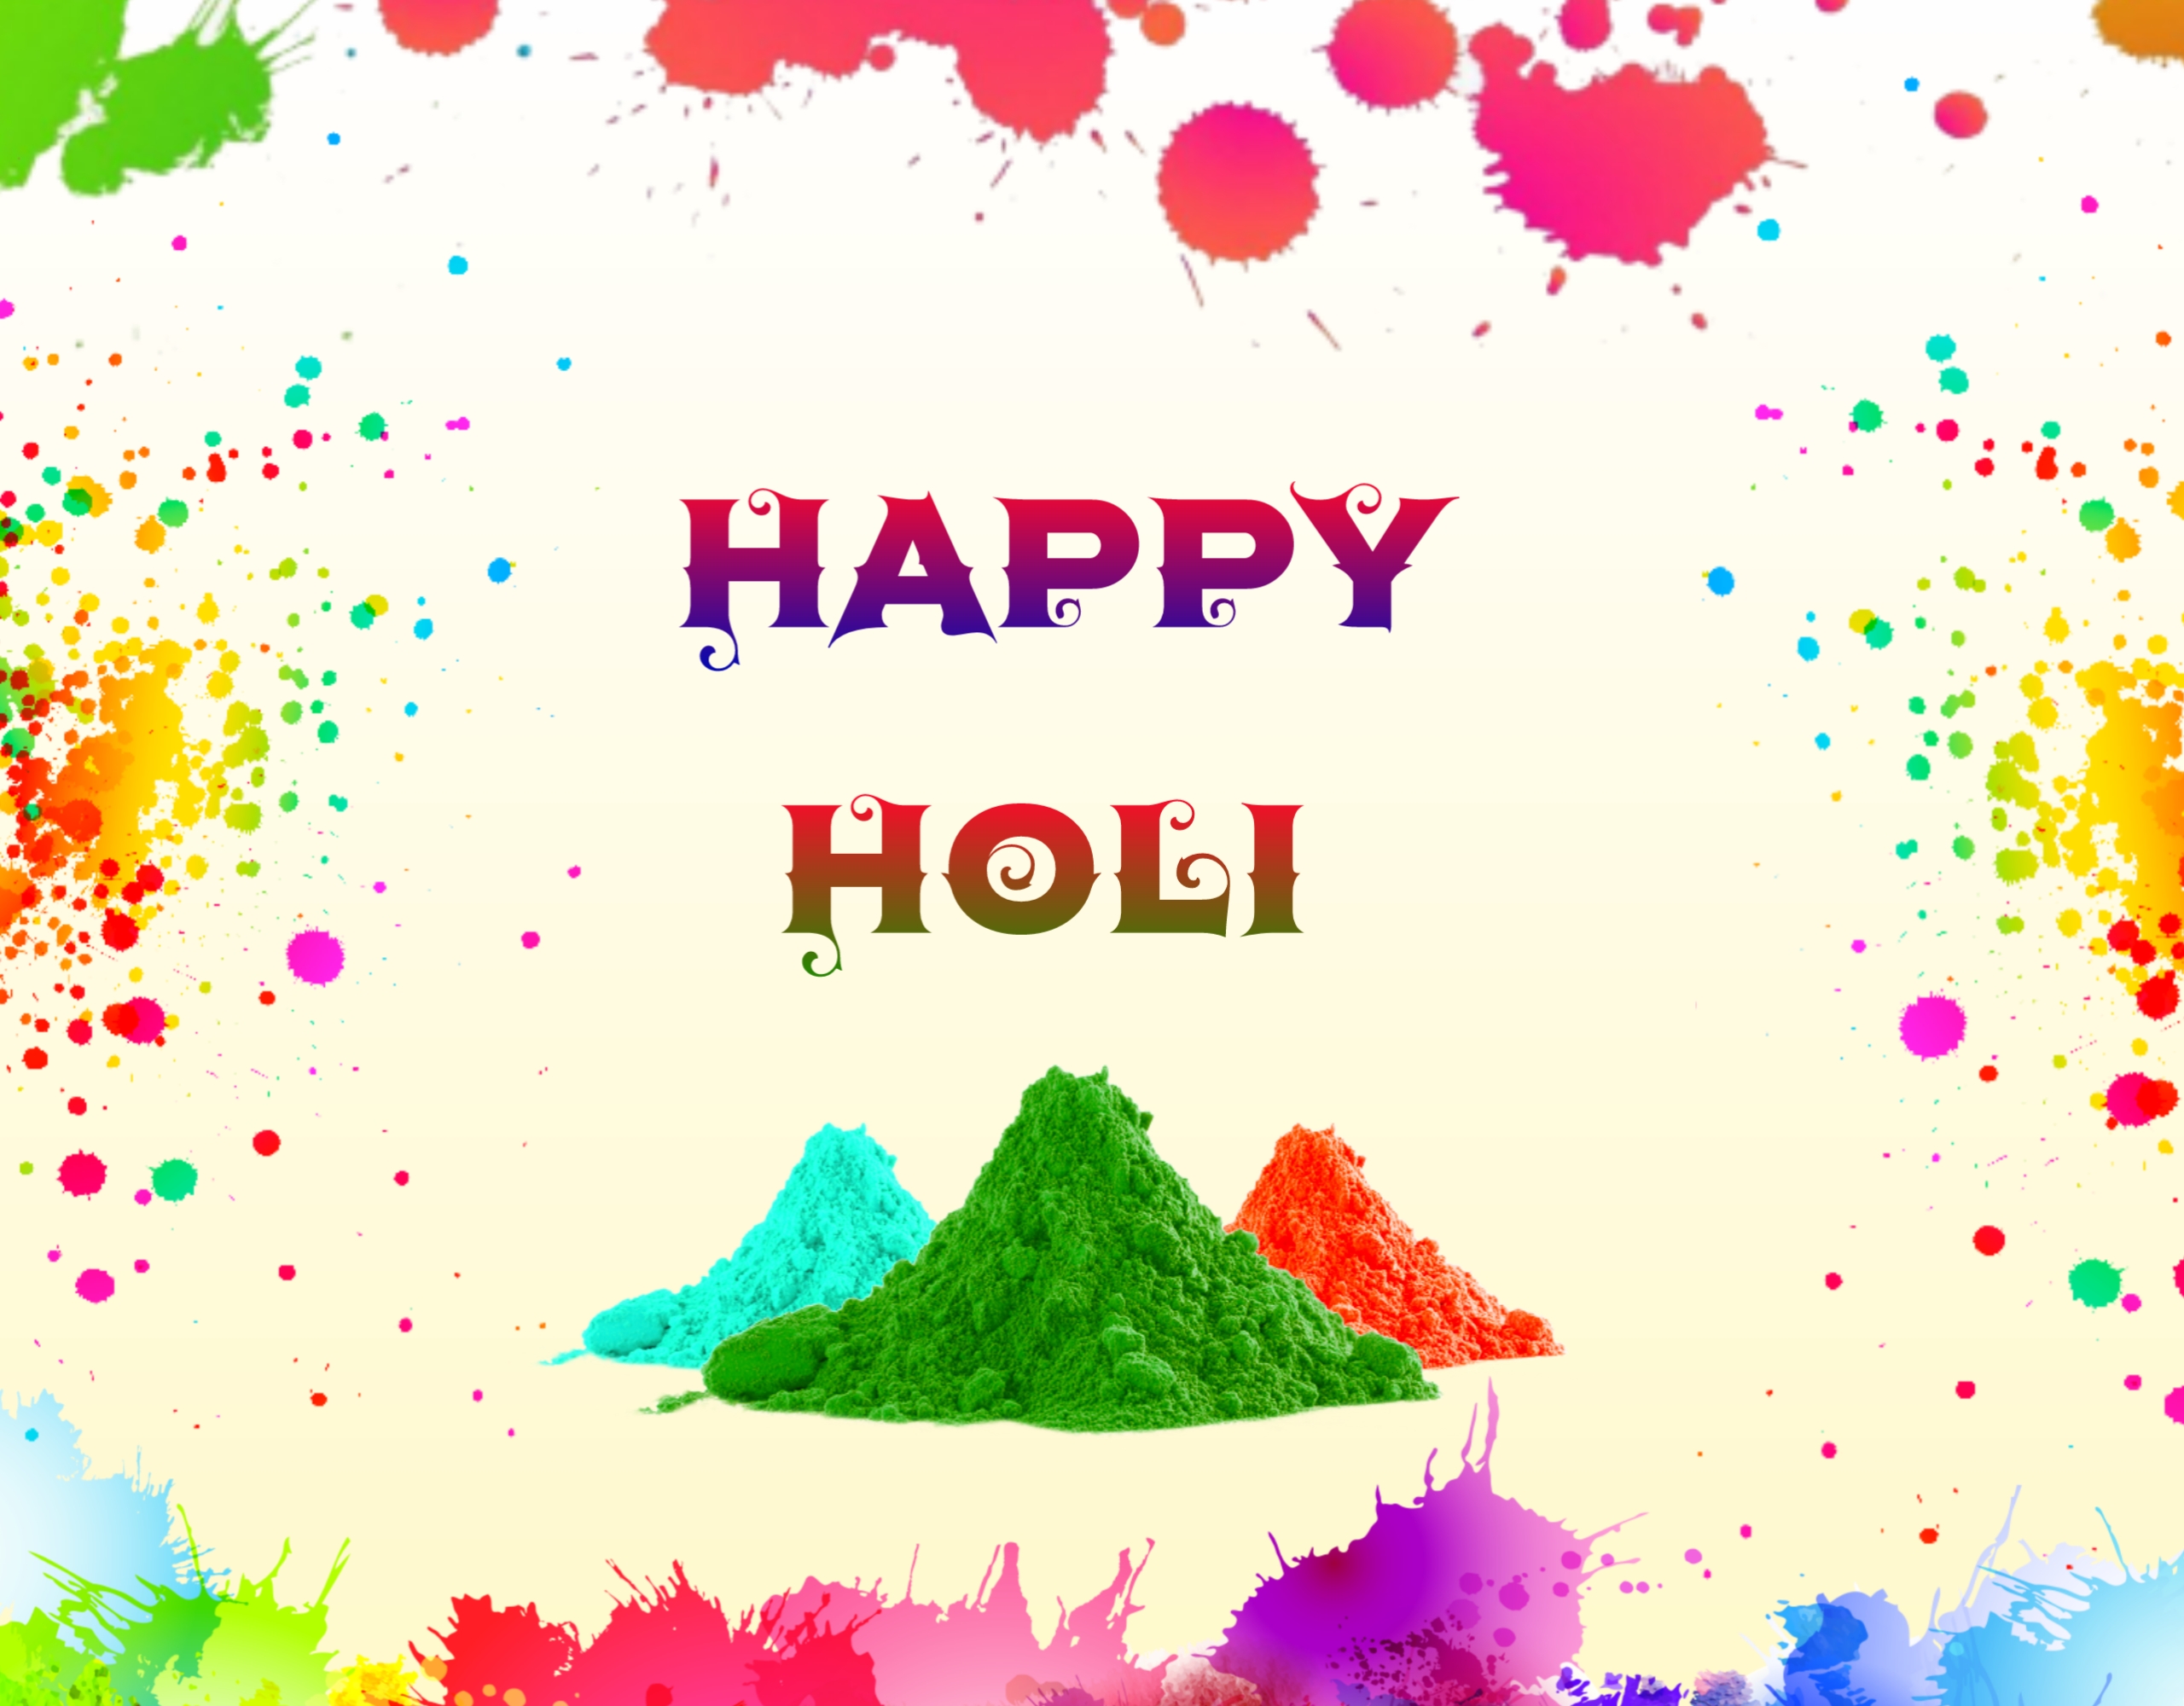 Beautiful Happy Holi Image With Colors 